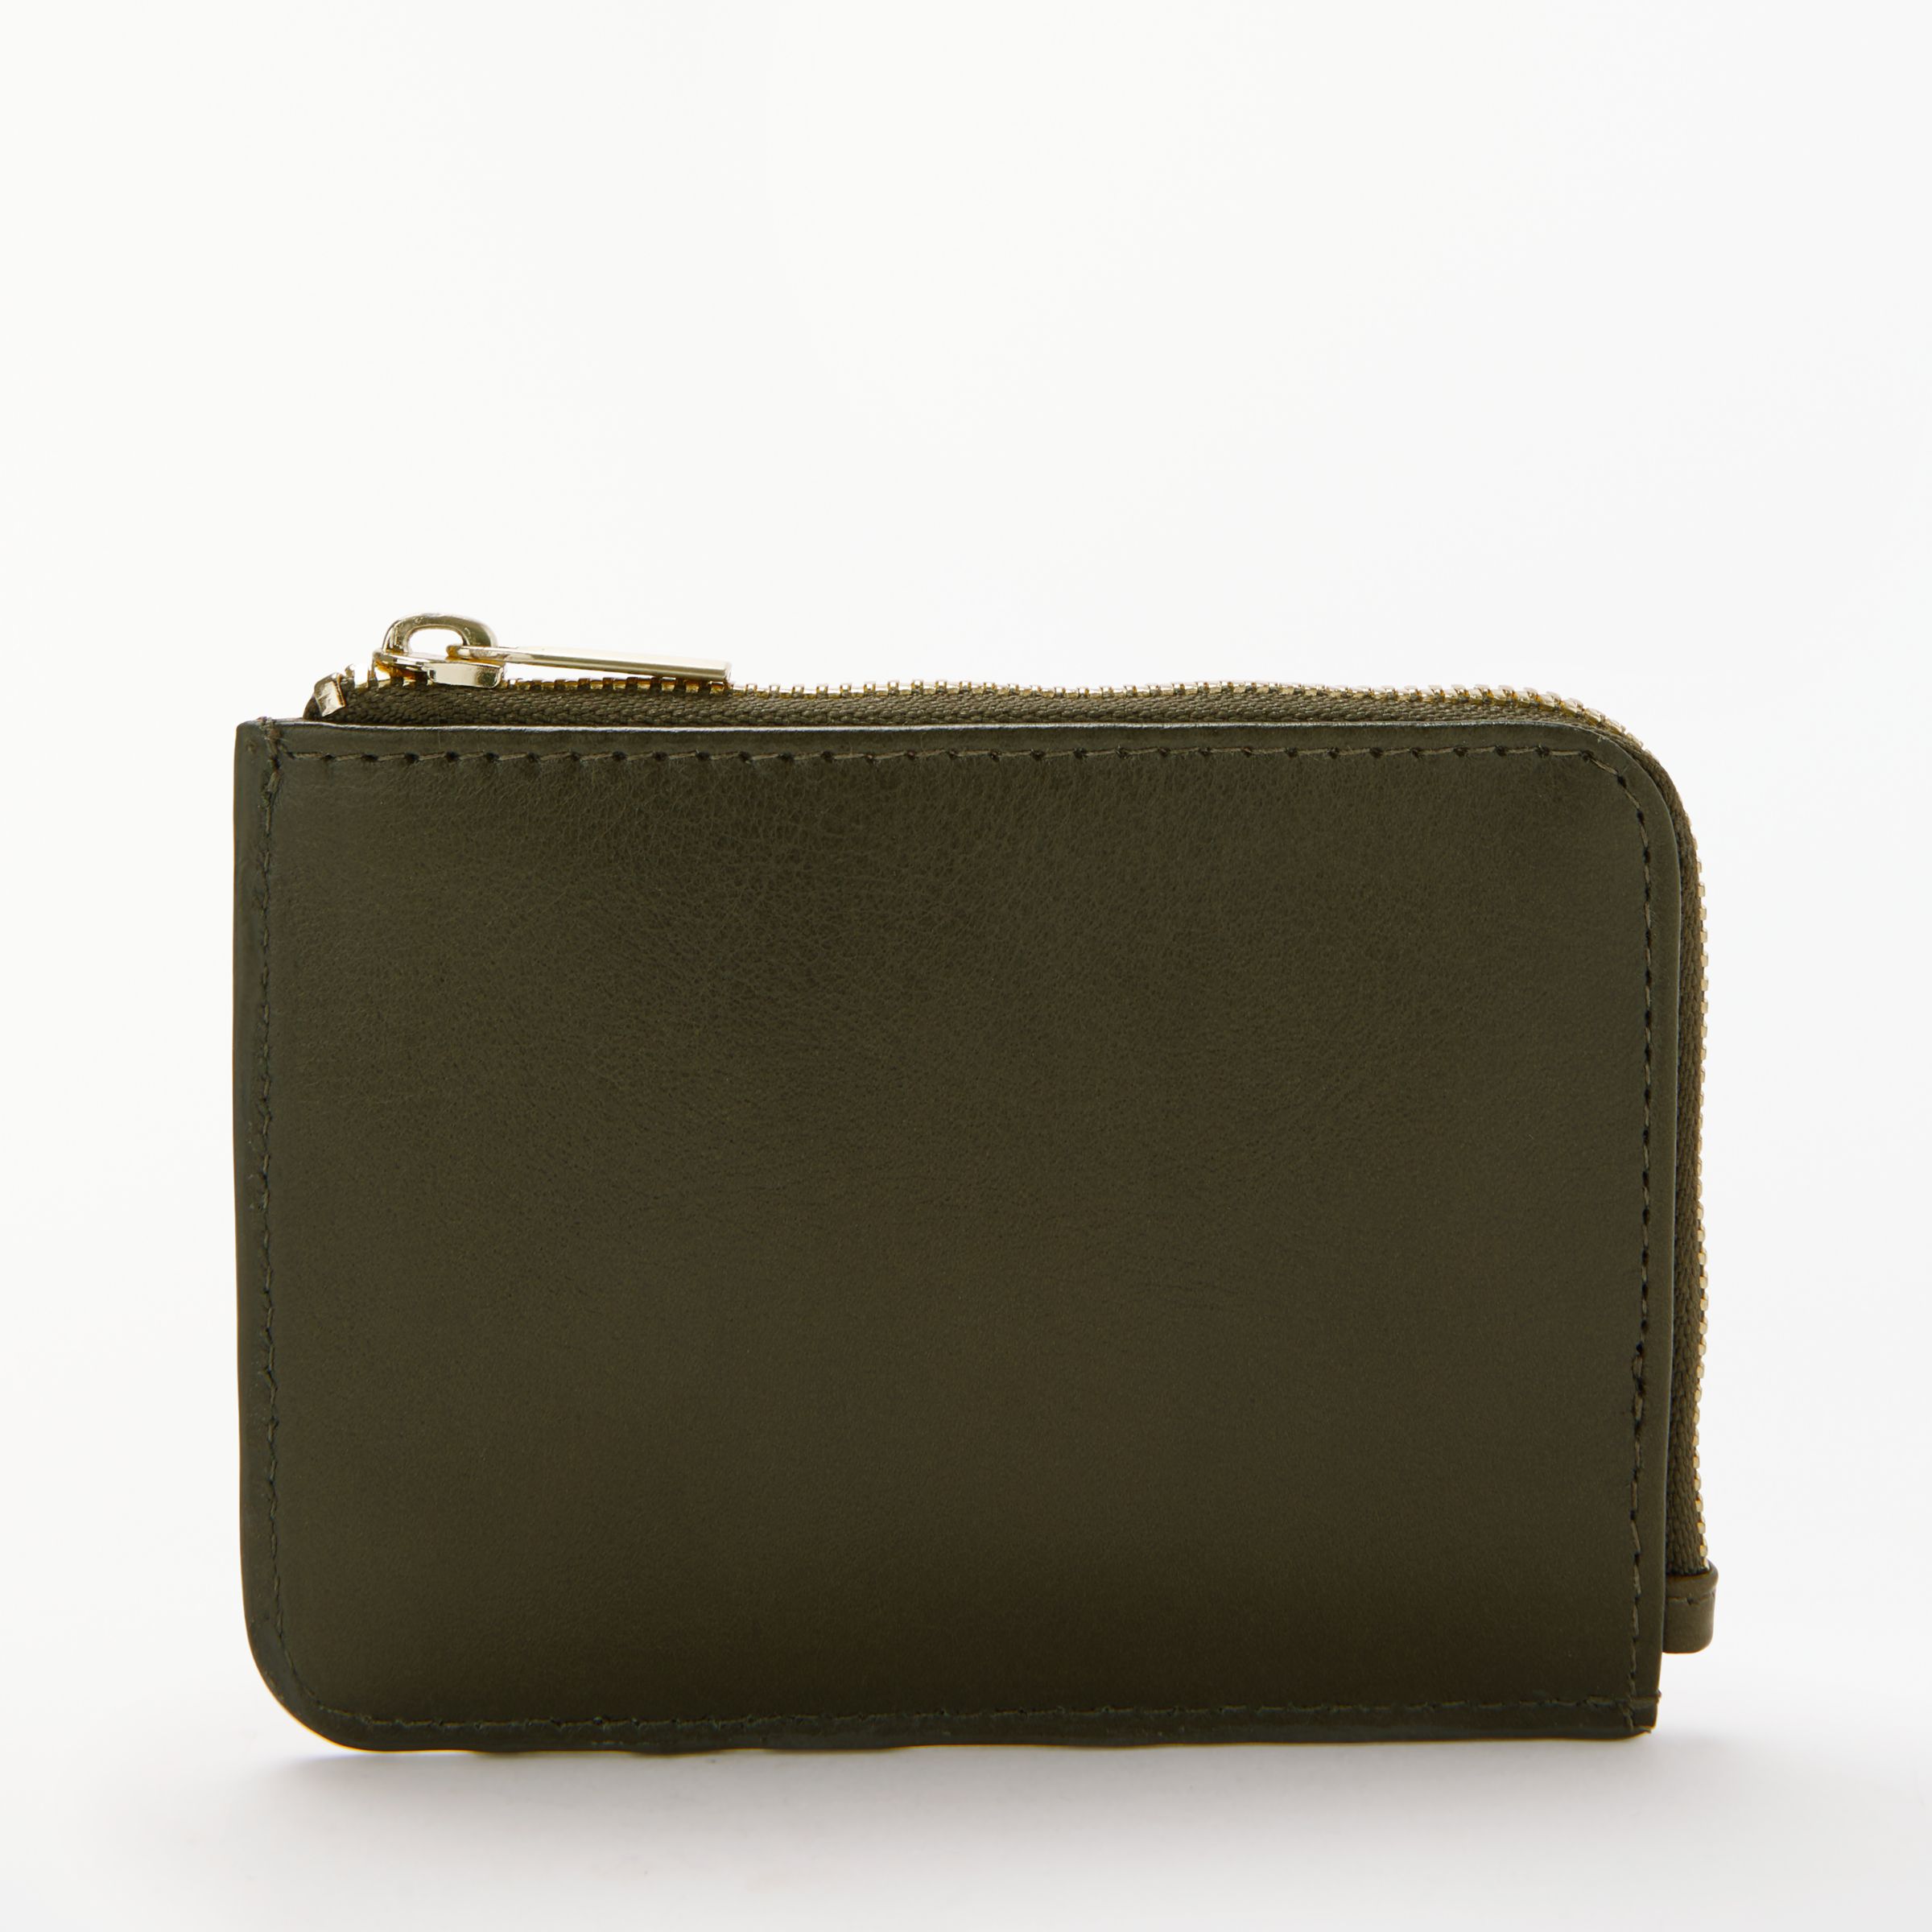 John Lewis & Partners Callie Leather Small Zip Around Coin Purse, Olive